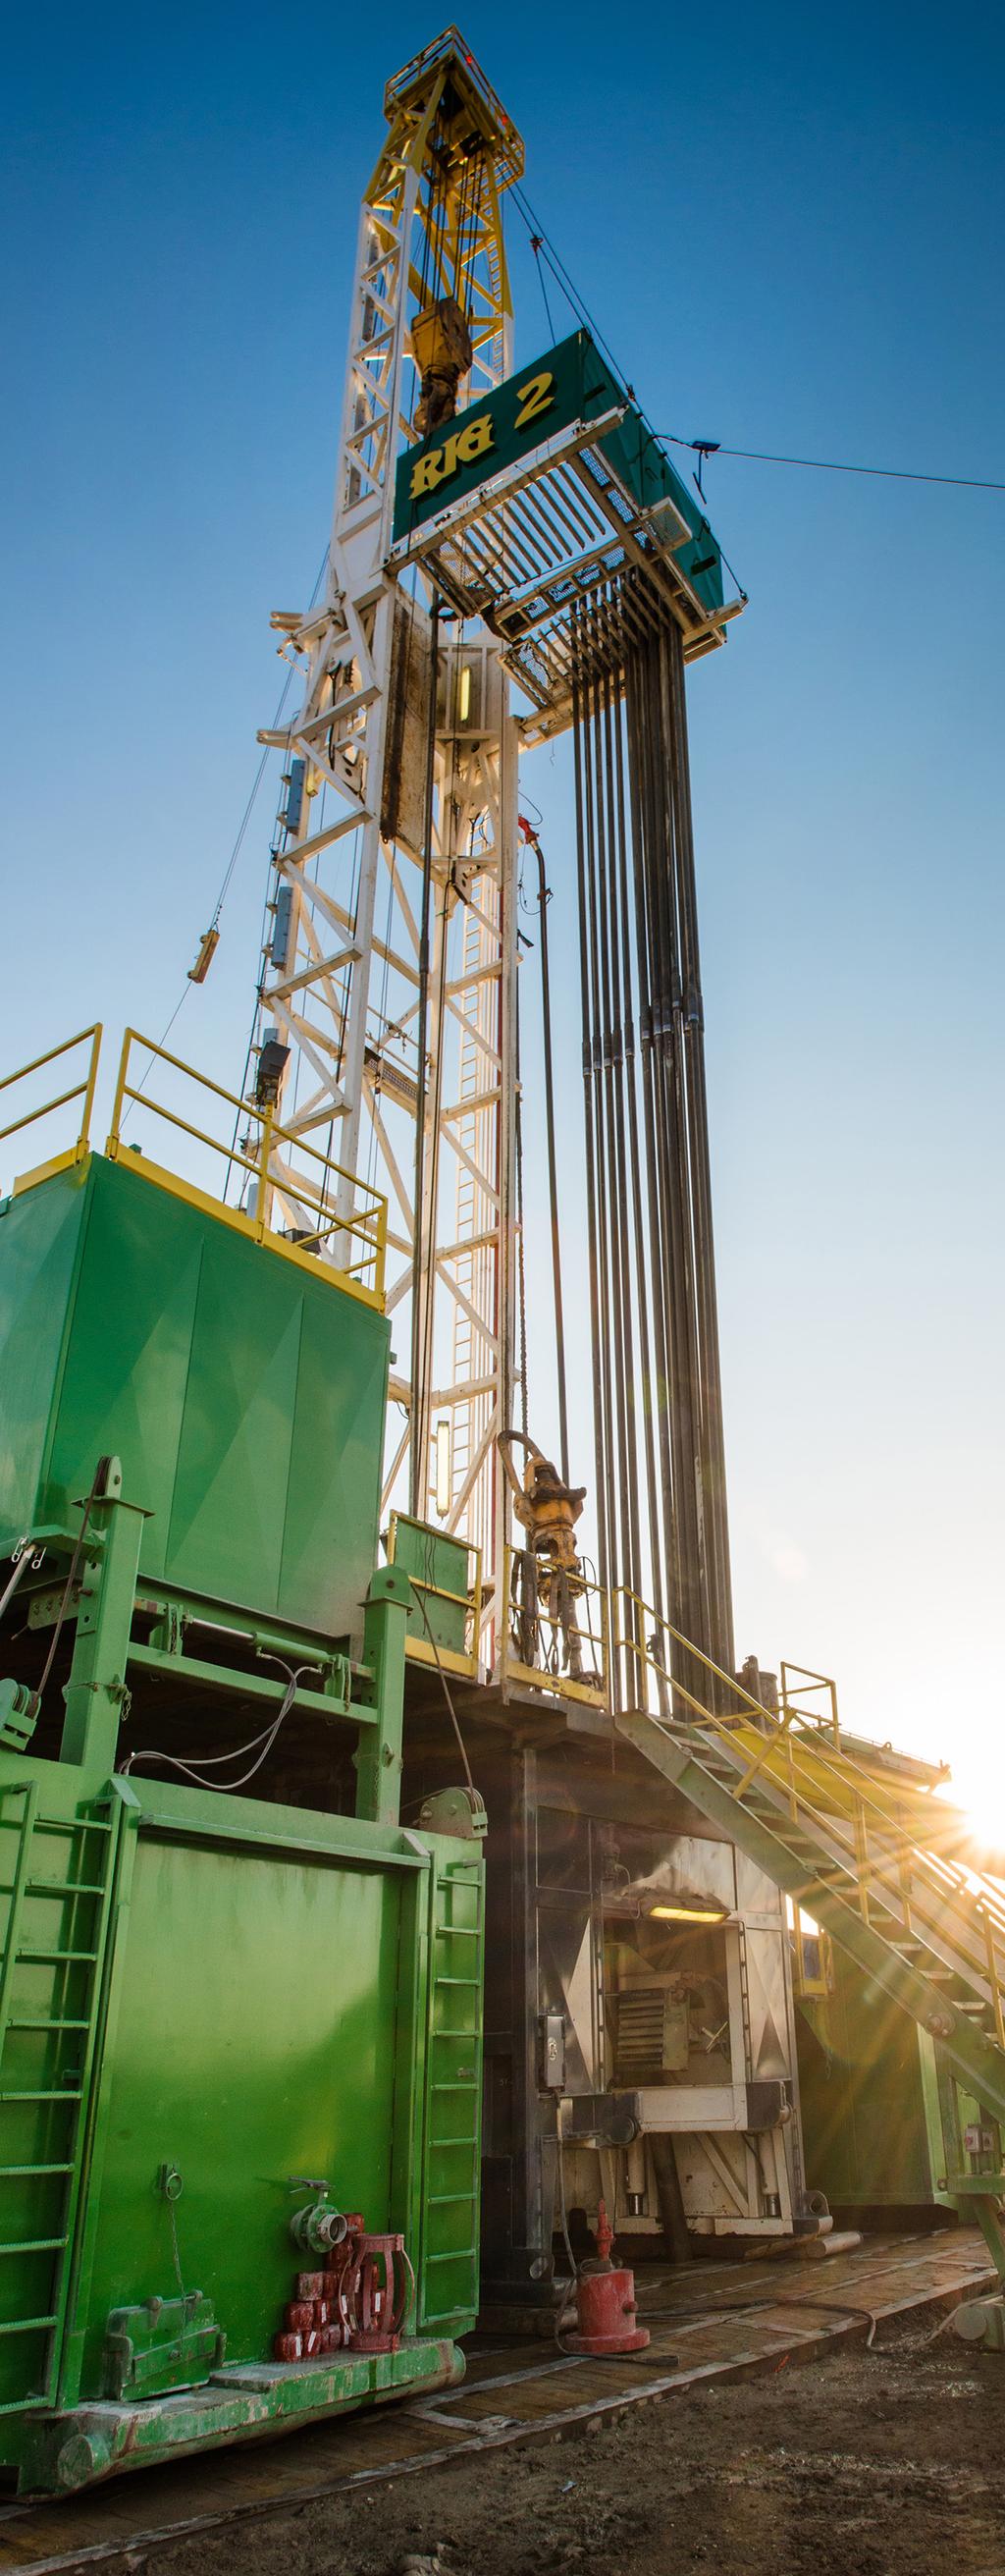 Implementation OGEMR was introduced on January 1, 2019 and will require companies to submit methane emissions reduction plans by September 2019, before compliance obligations take effect on January